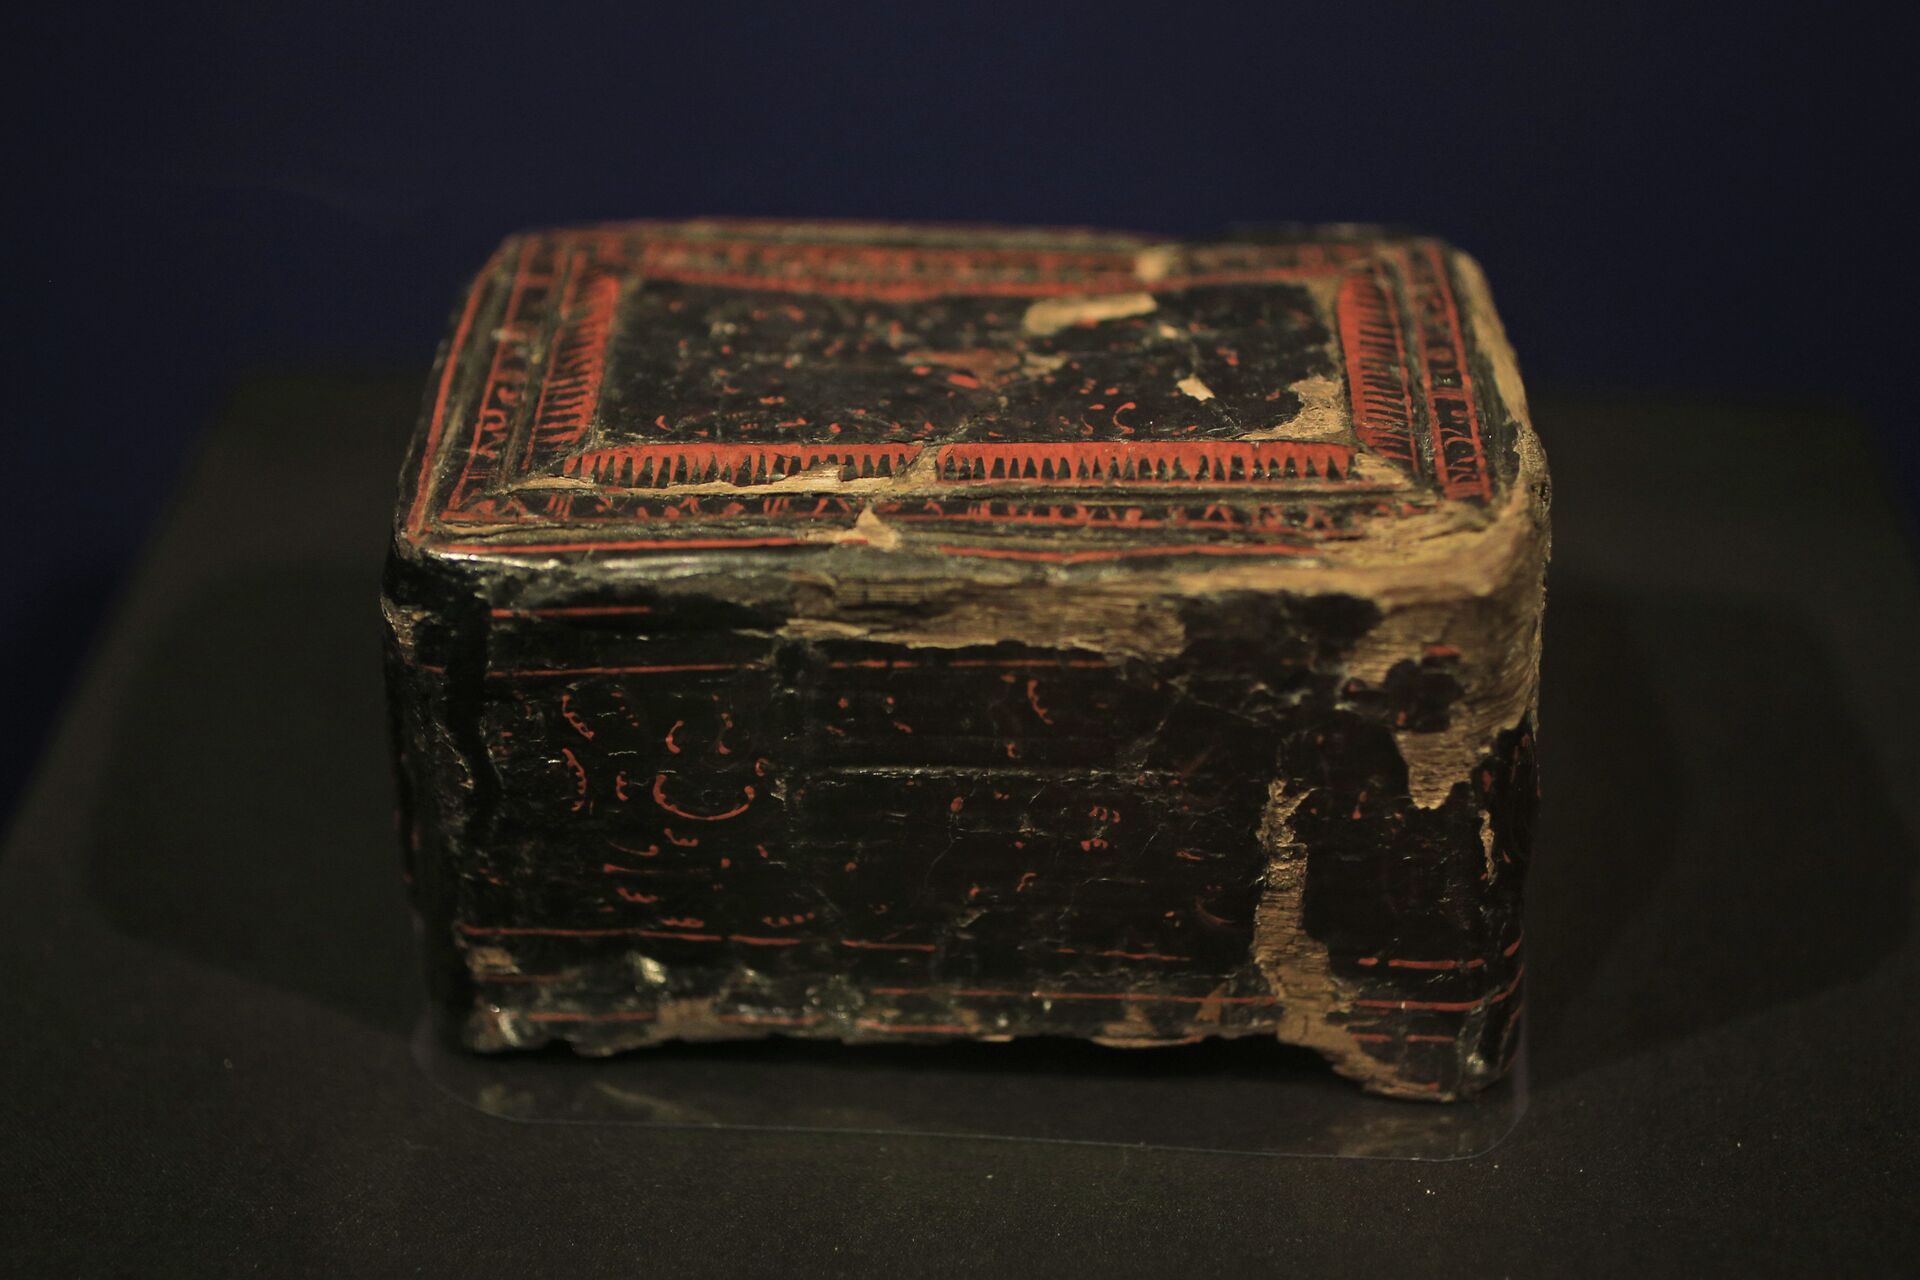  A Chinese lacquer box from the first century A.D., a burial gift for a Late-Scythian woman, is displayed as part of the exhibit called The Crimea - Gold and Secrets of the Black Sea, at Allard Pierson historical museum in Amsterdam - Sputnik International, 1920, 26.10.2021